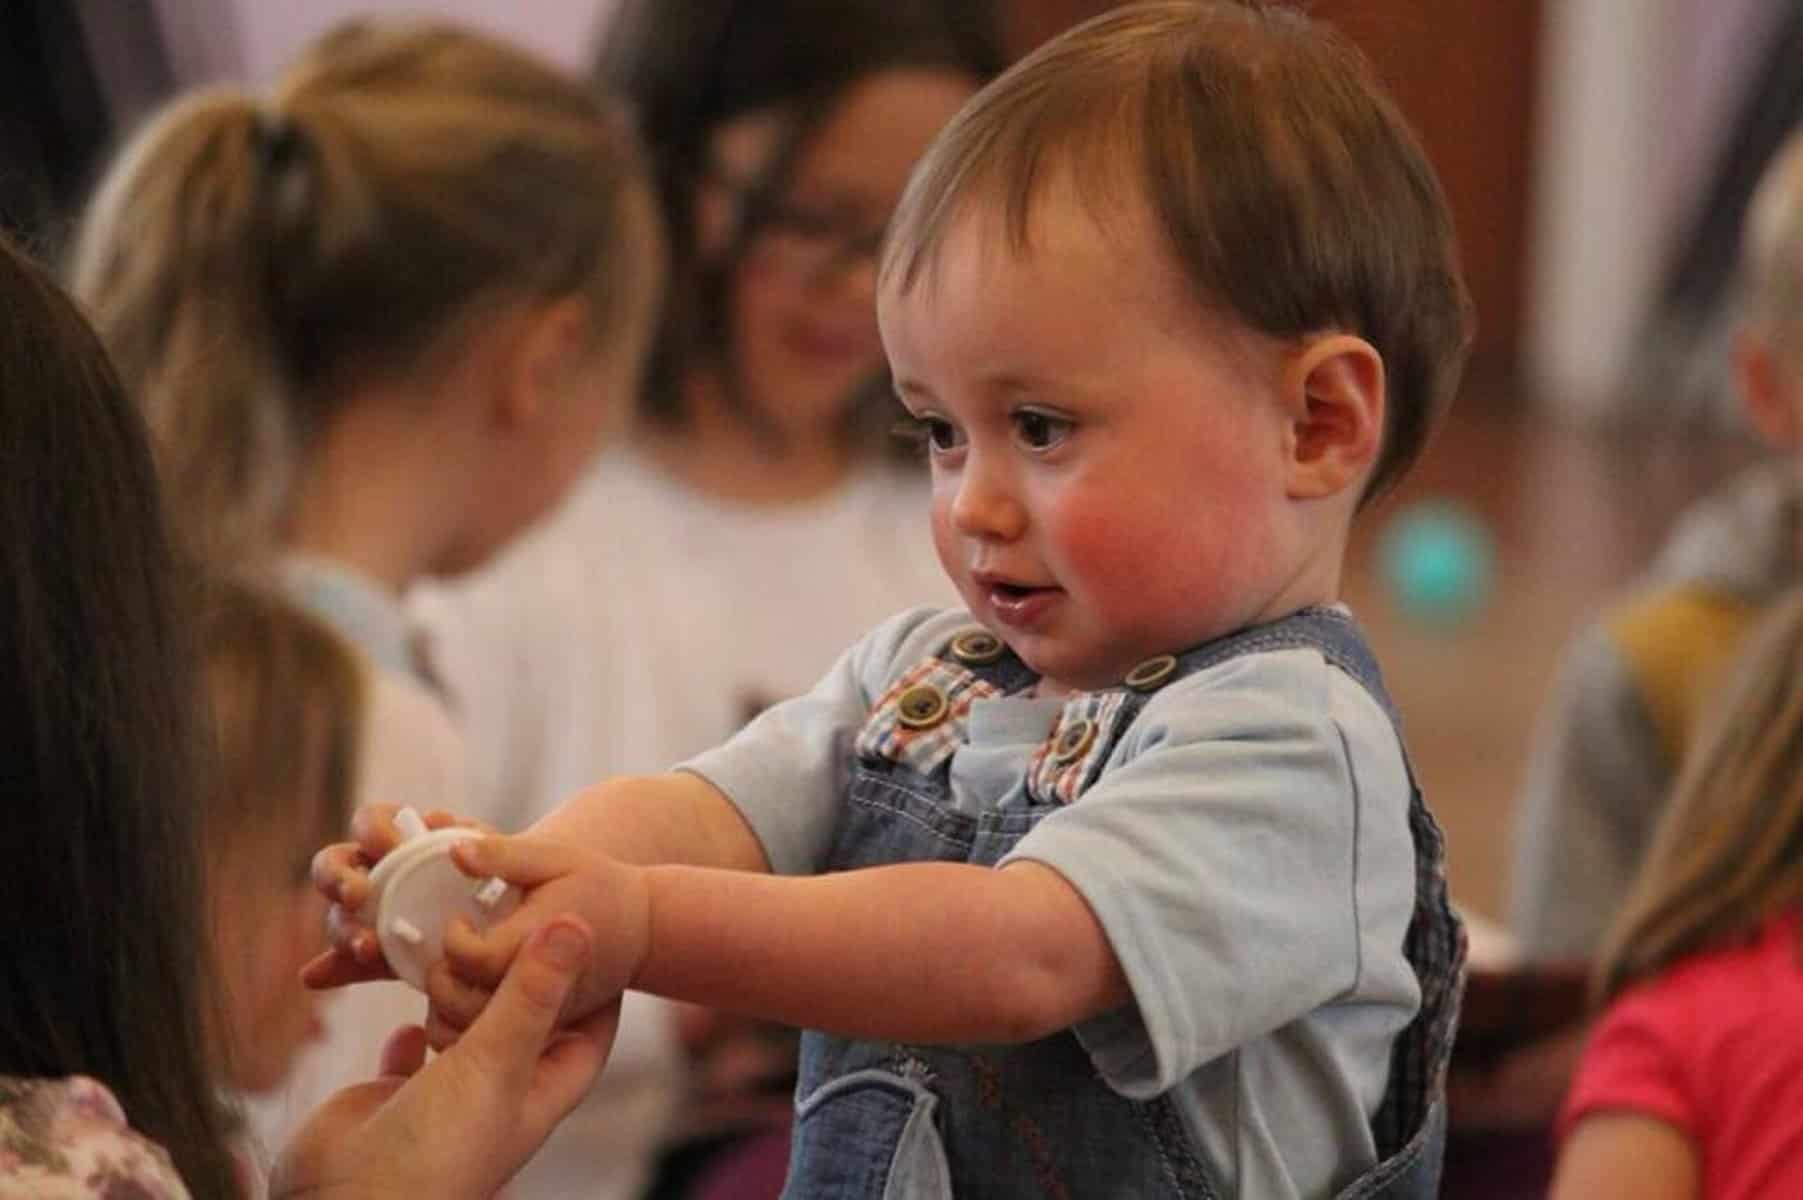 A toddler holds an item out and arms length, showing it to someone.